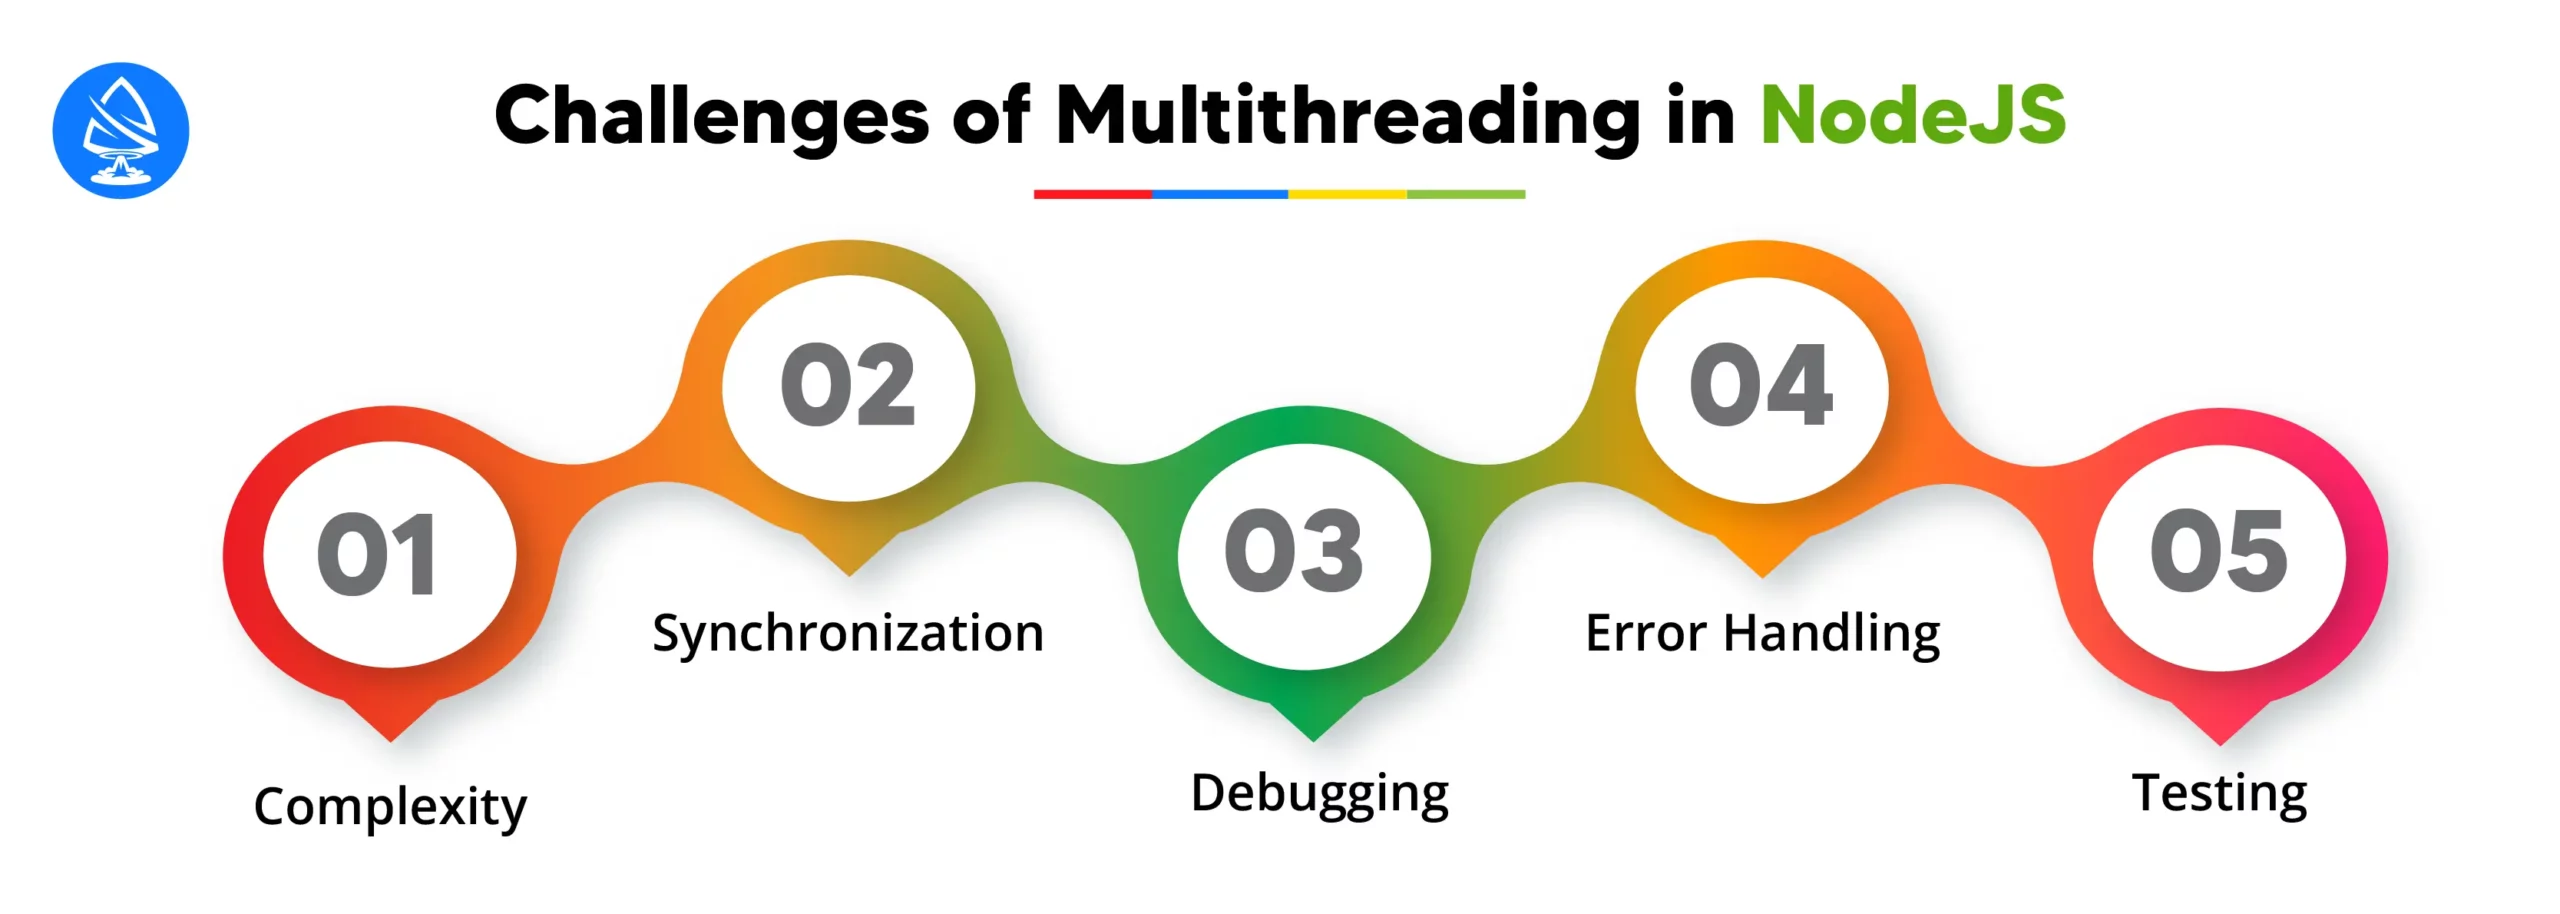 Challenges of Multithreading in node